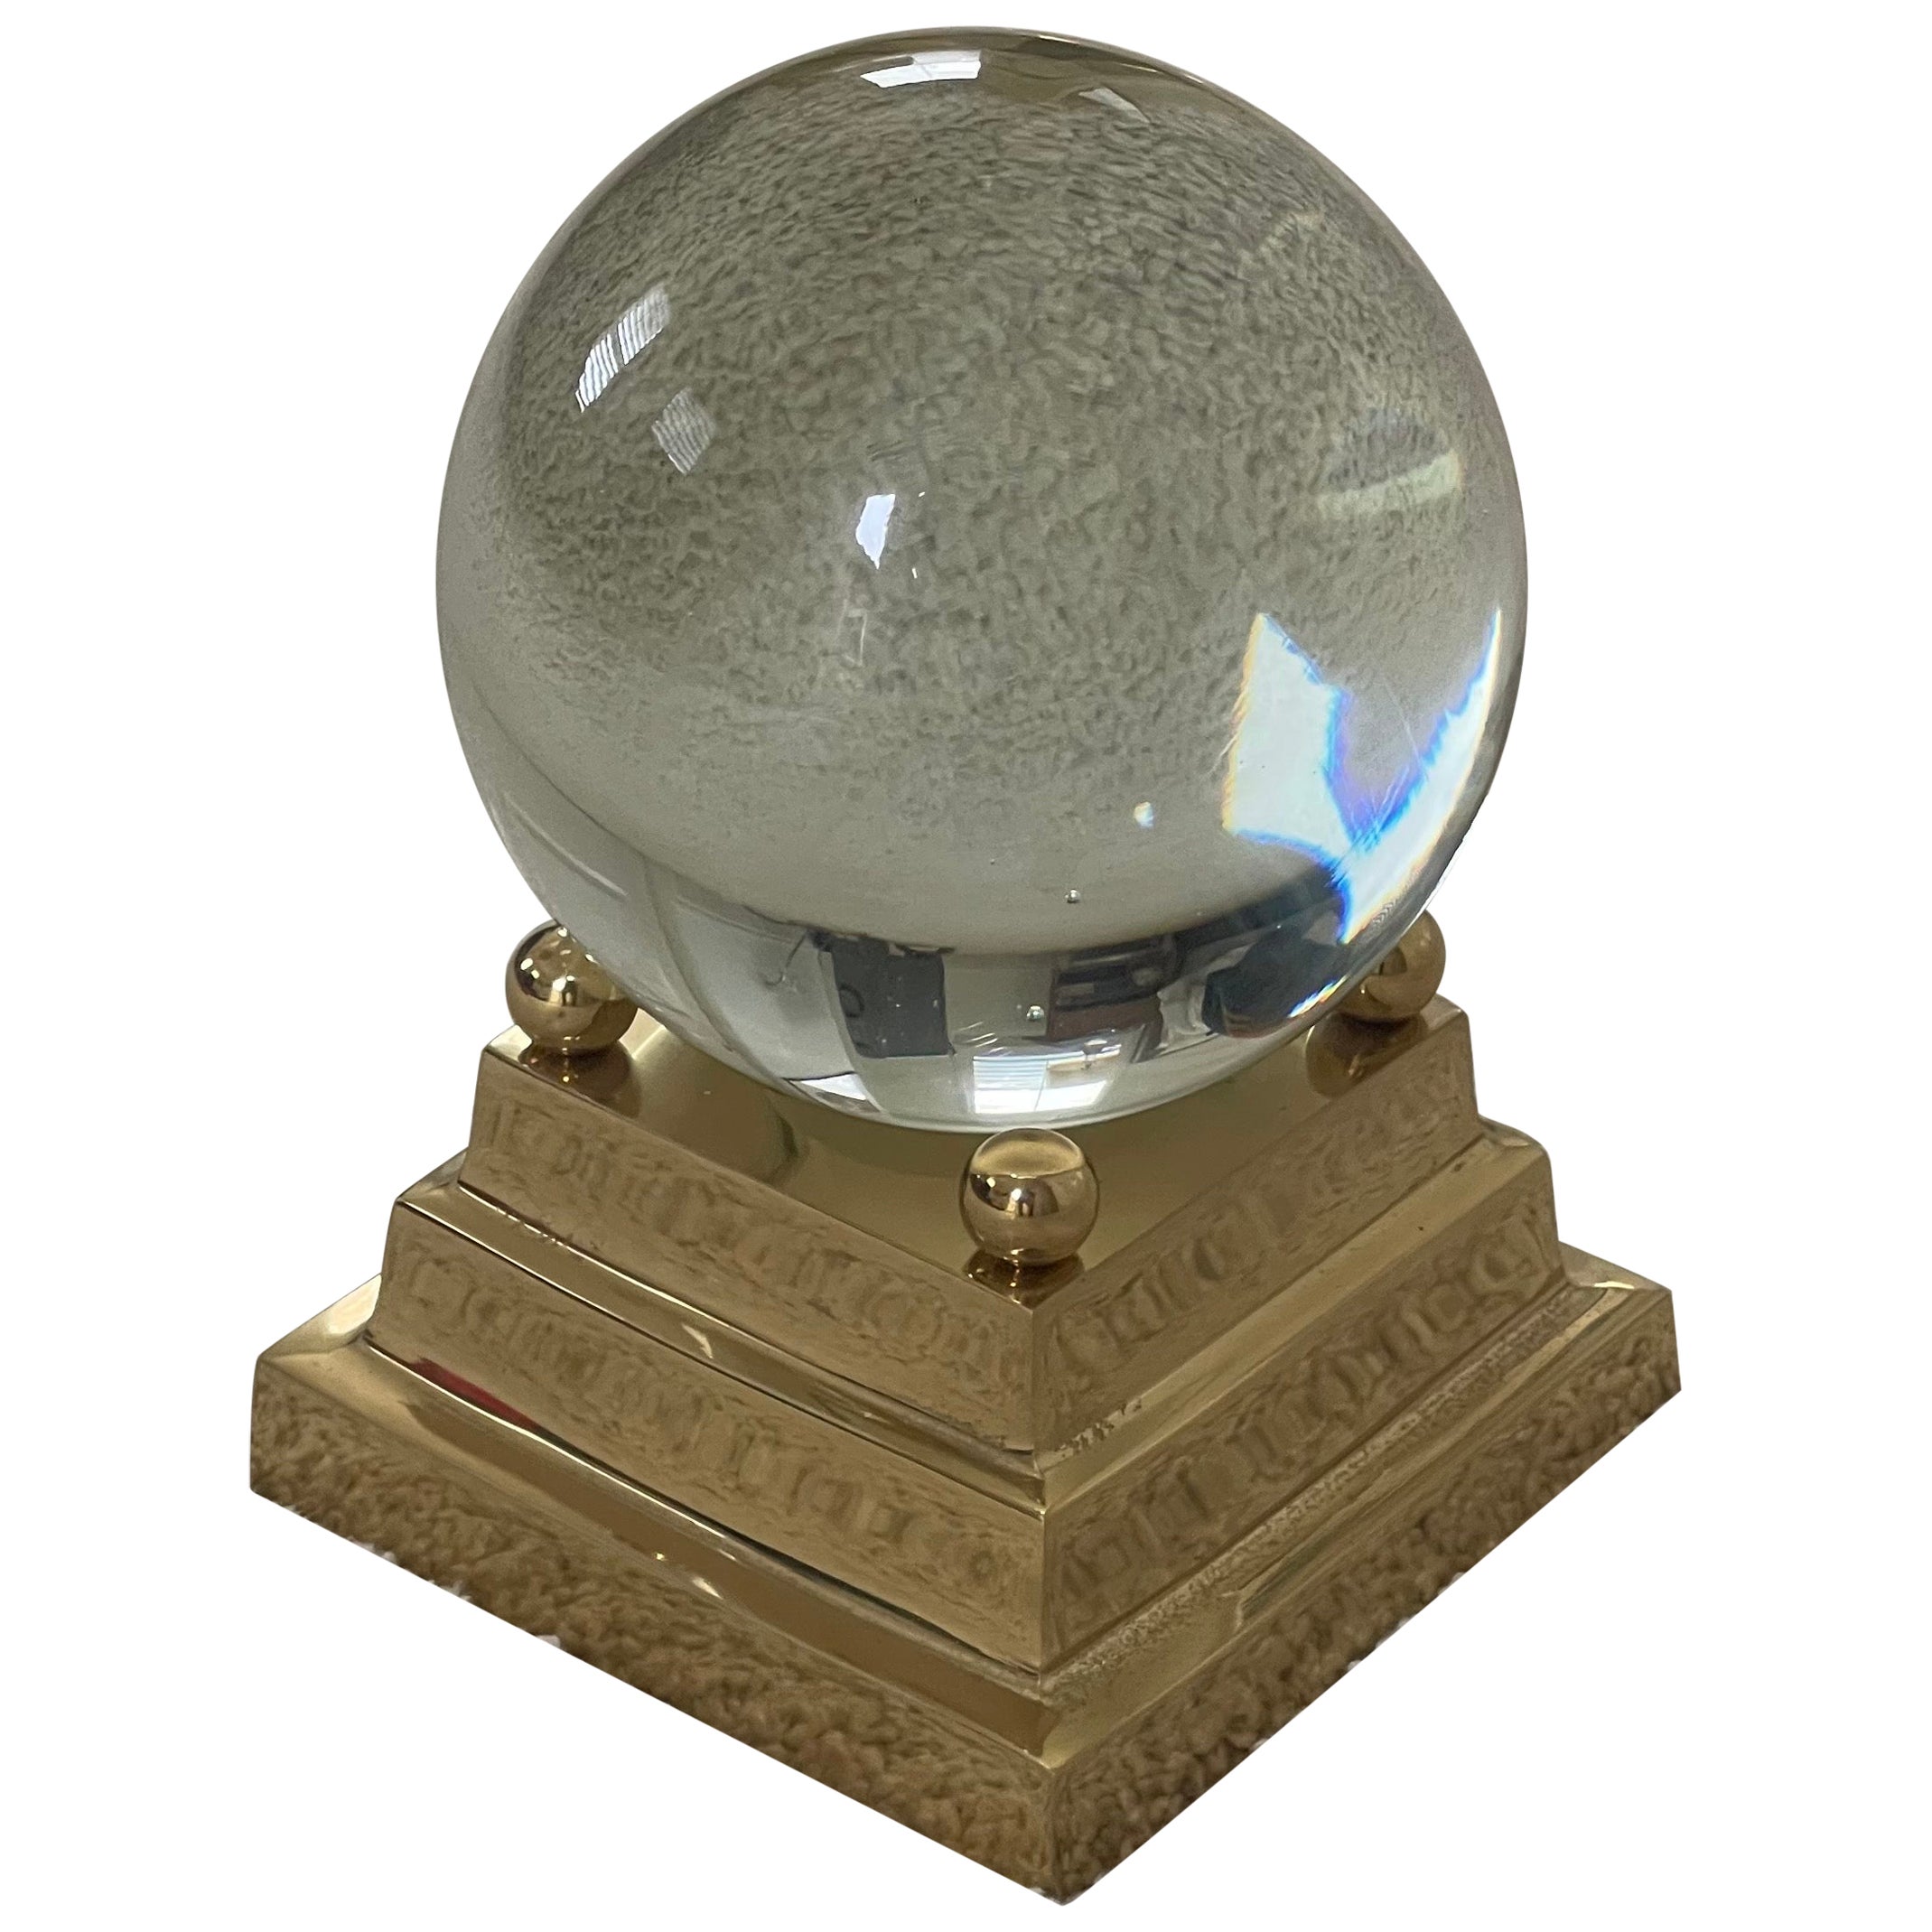  Decorative Crystal Sphere on Brass Base For Sale